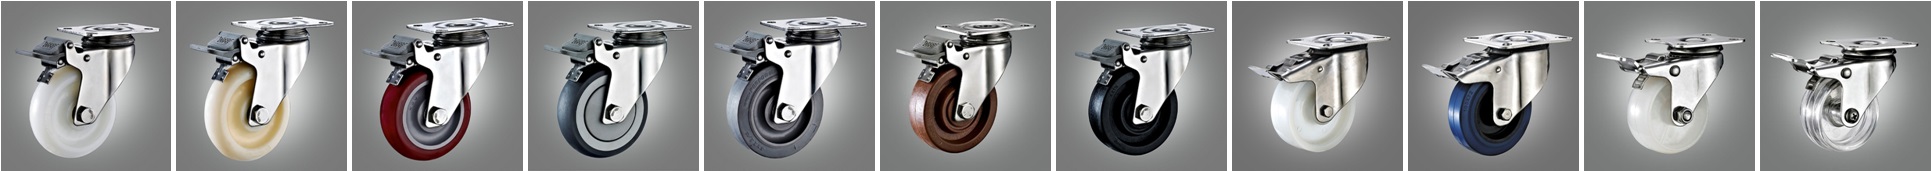 DORE Stainless Steel Castor Wheel Collection